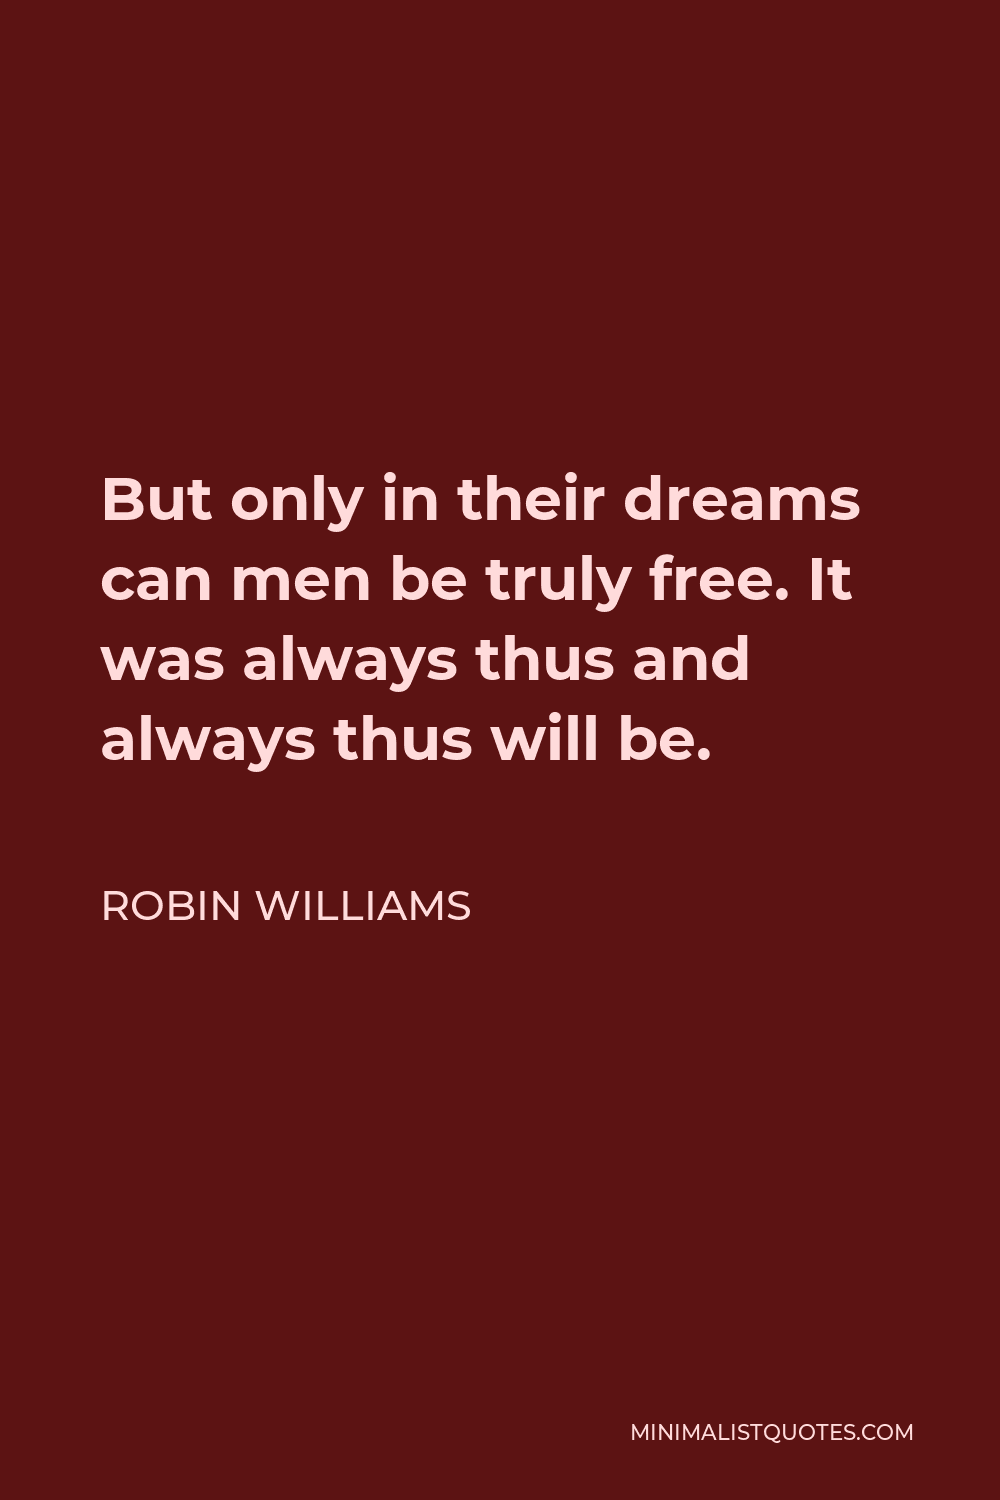 Robin Williams Quote - But only in their dreams can men be truly free. It was always thus and always thus will be.